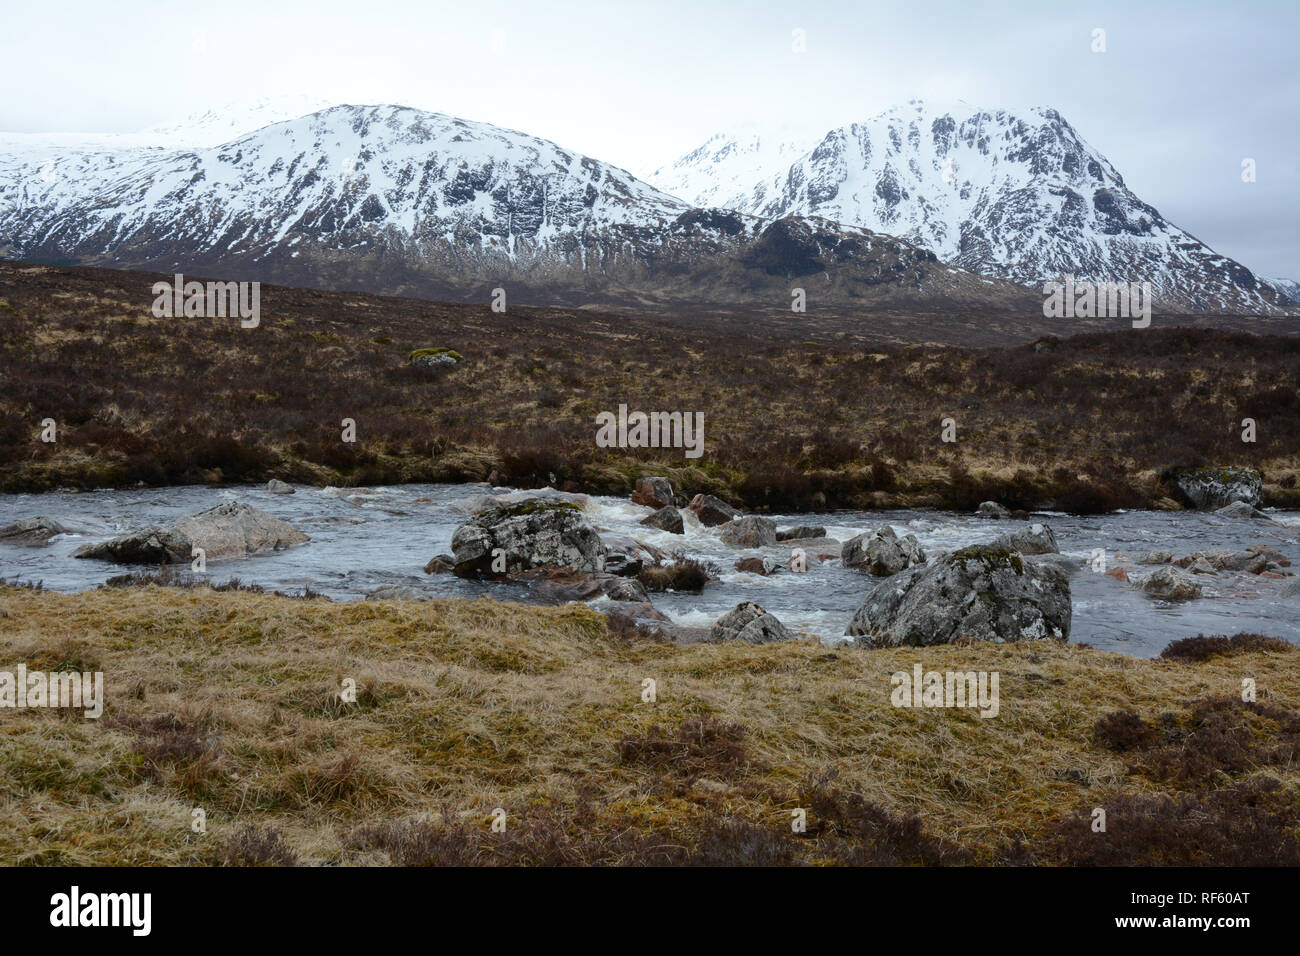 The River Etive with the snowy peaks of the Scottish Highlands in the background, Glencoe region, Scotland, United Kingdom. Stock Photo